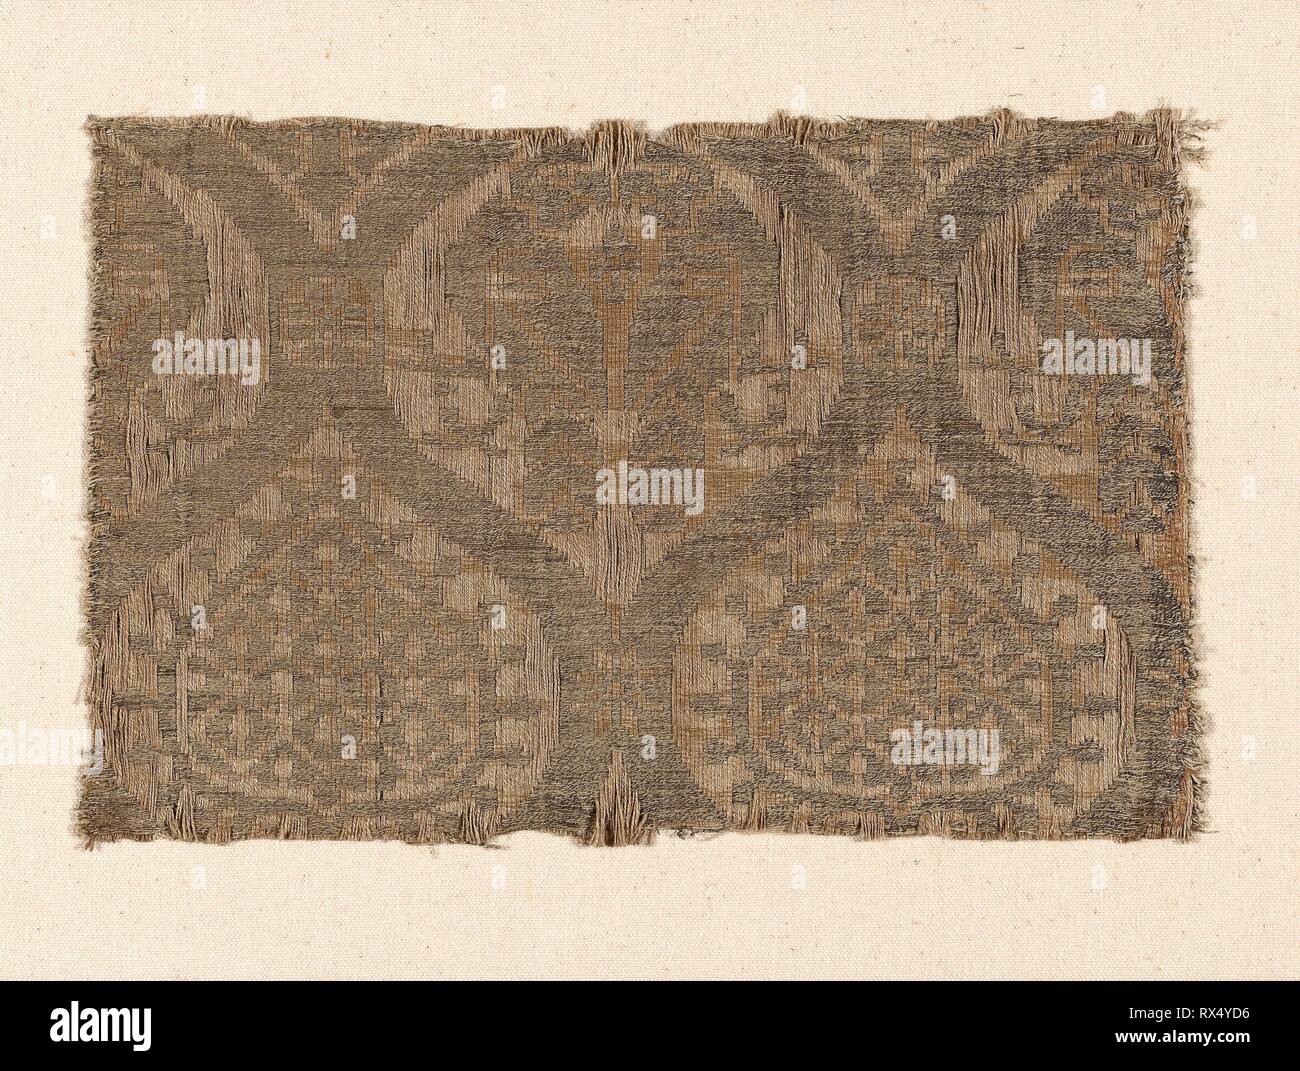 Fragment. Spain or Italy or Germany. Date: 1201-1300. Dimensions: 16.8 x 26.1 cm (6 5/8 x 10 1/4 in.). Silk, linen, and gilt animal substrate wrapped linen, two-color complementary weft, weft-float faced twill weave with inner warps. Origin: Spain. Museum: The Chicago Art Institute. Stock Photo